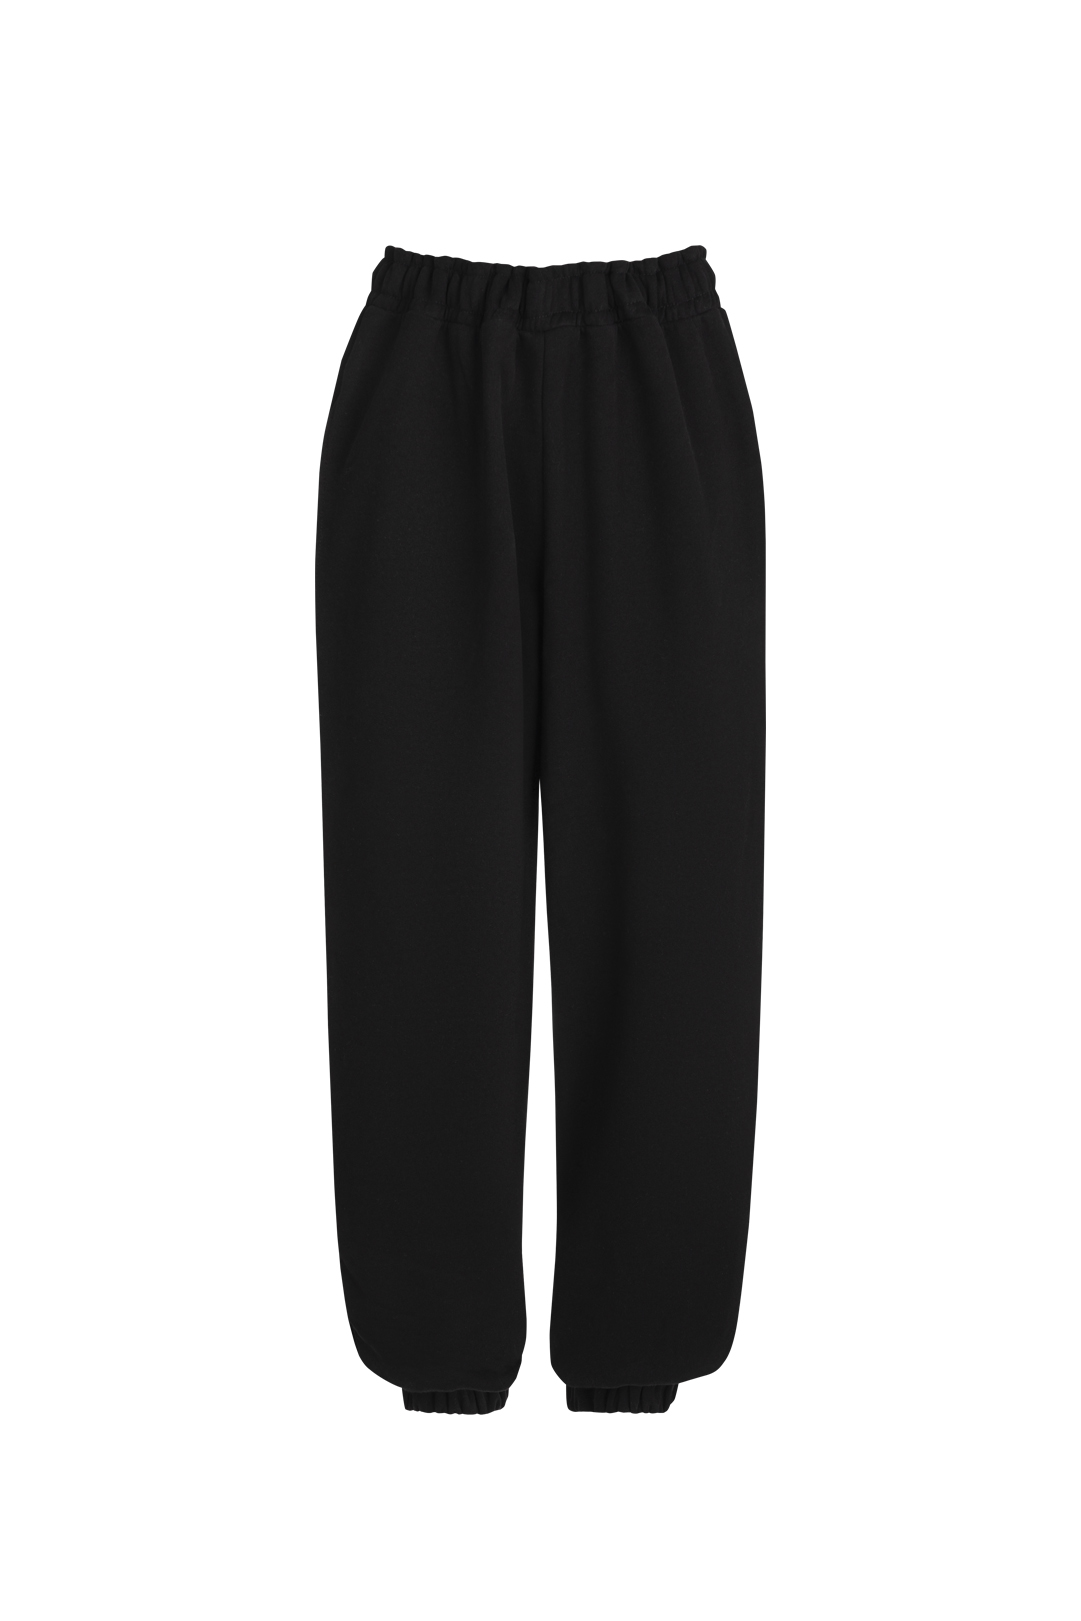 pants groove in black color